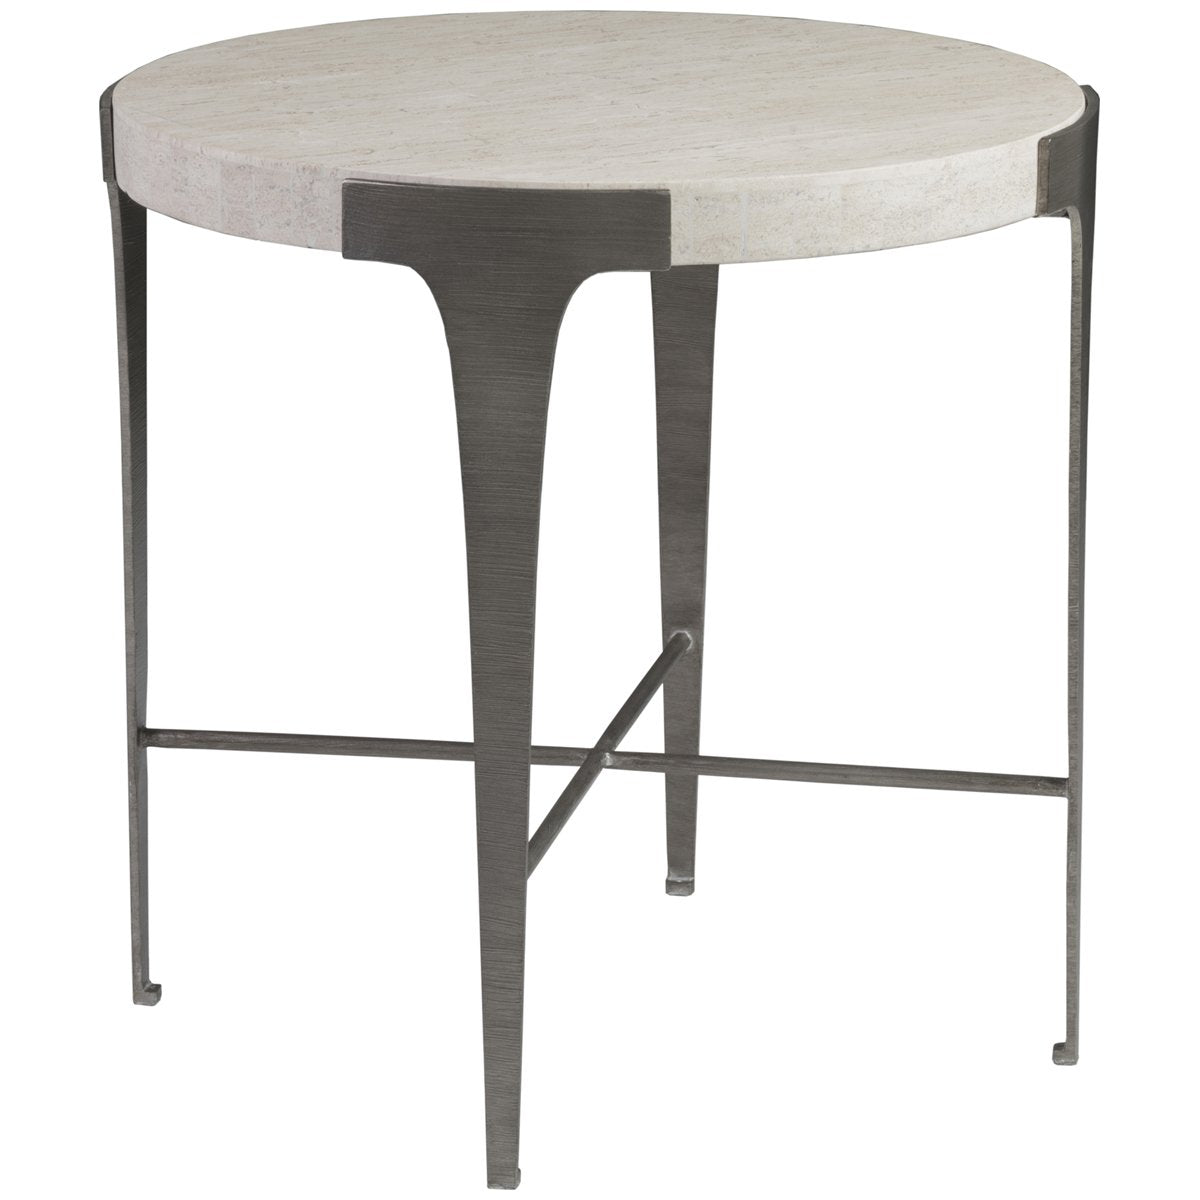 Artistica Home Cachet Round End Table 2271-953